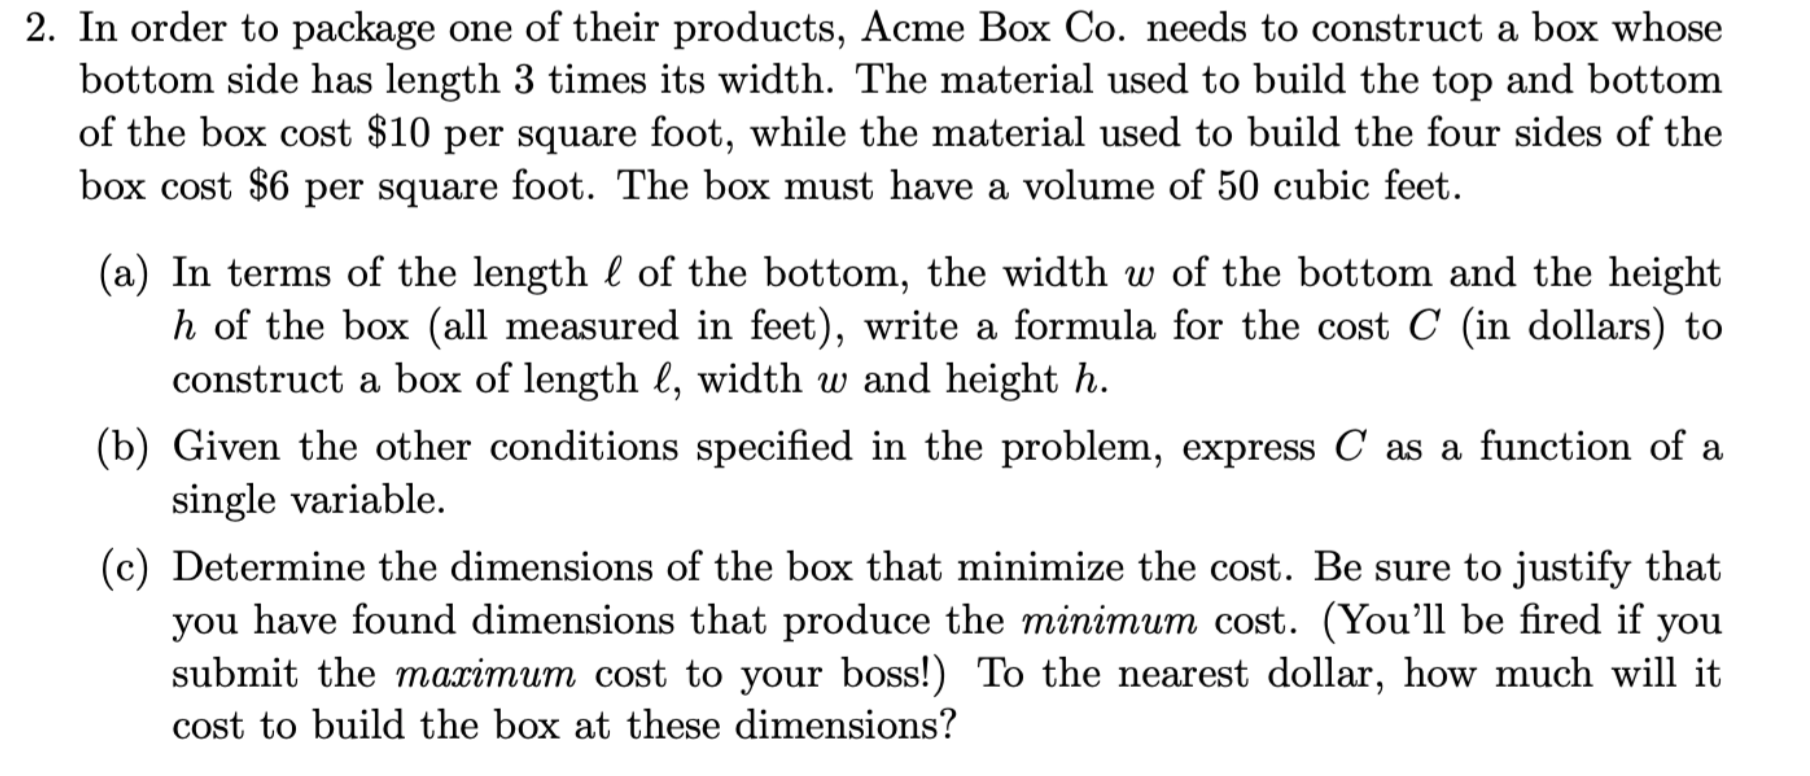 2. In order to package one of their products, Acme Box Co. needs to construct a box whose
bottom side has length 3 times its width. The material used to build the top and bottom
of the box cost $10 per square foot, while the material used to build the four sides of the
box cost $6 per square foot. The box must have a volume of 50 cubic feet.
(a) In terms of the length l of the bottom, the width w of the bottom and the height
h of the box (all measured in feet), write a formula for the cost C (in dollars) to
construct a box of length l, width w and height h.
(b) Given the other conditions specified in the problem, express C as a function of a
single variable.
(c) Determine the dimensions of the box that minimize the cost. Be sure to justify that
you have found dimensions that produce the minimum cost. (You'll be fired if you
submit the maximum cost to your boss!!) To the nearest dollar, how much will it
cost to build the box at these dimensions?
